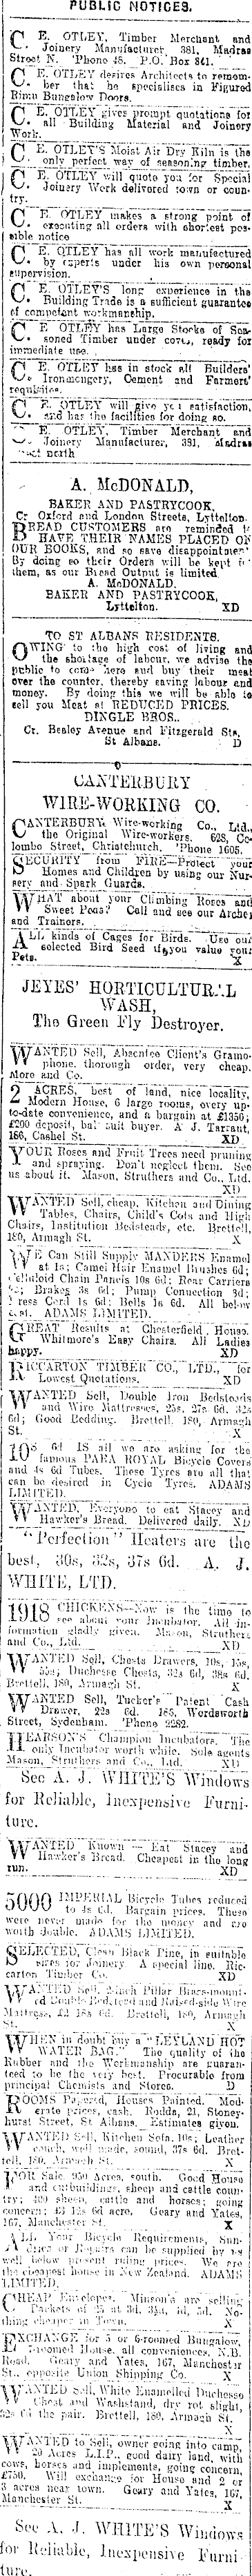 Papers Past Newspapers Star Christchurch 29 July 1918 Page 7 Advertisements Column 6